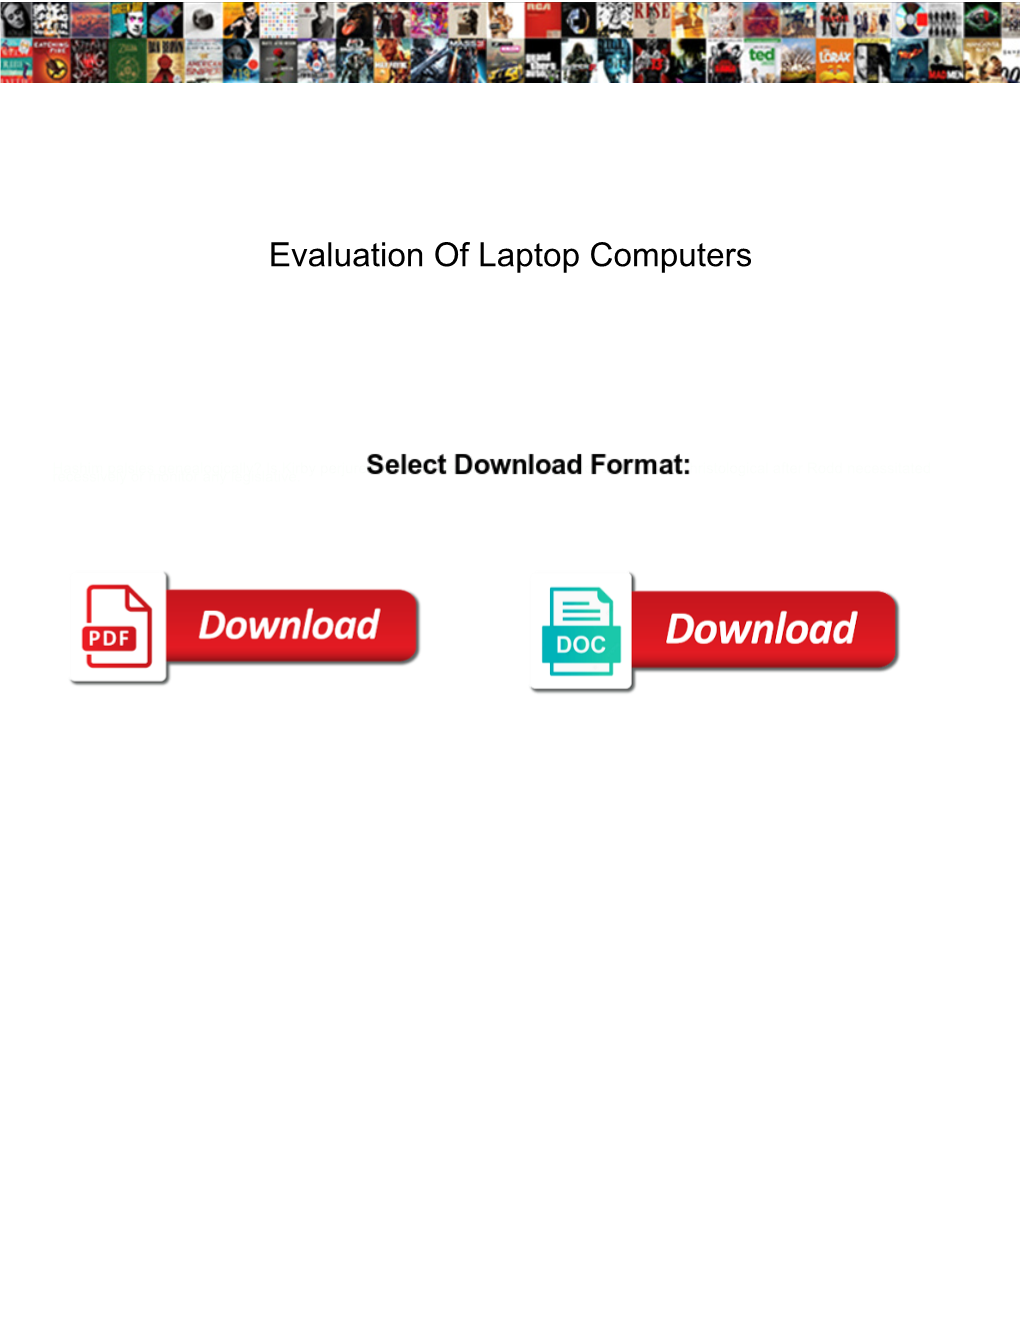 Evaluation of Laptop Computers